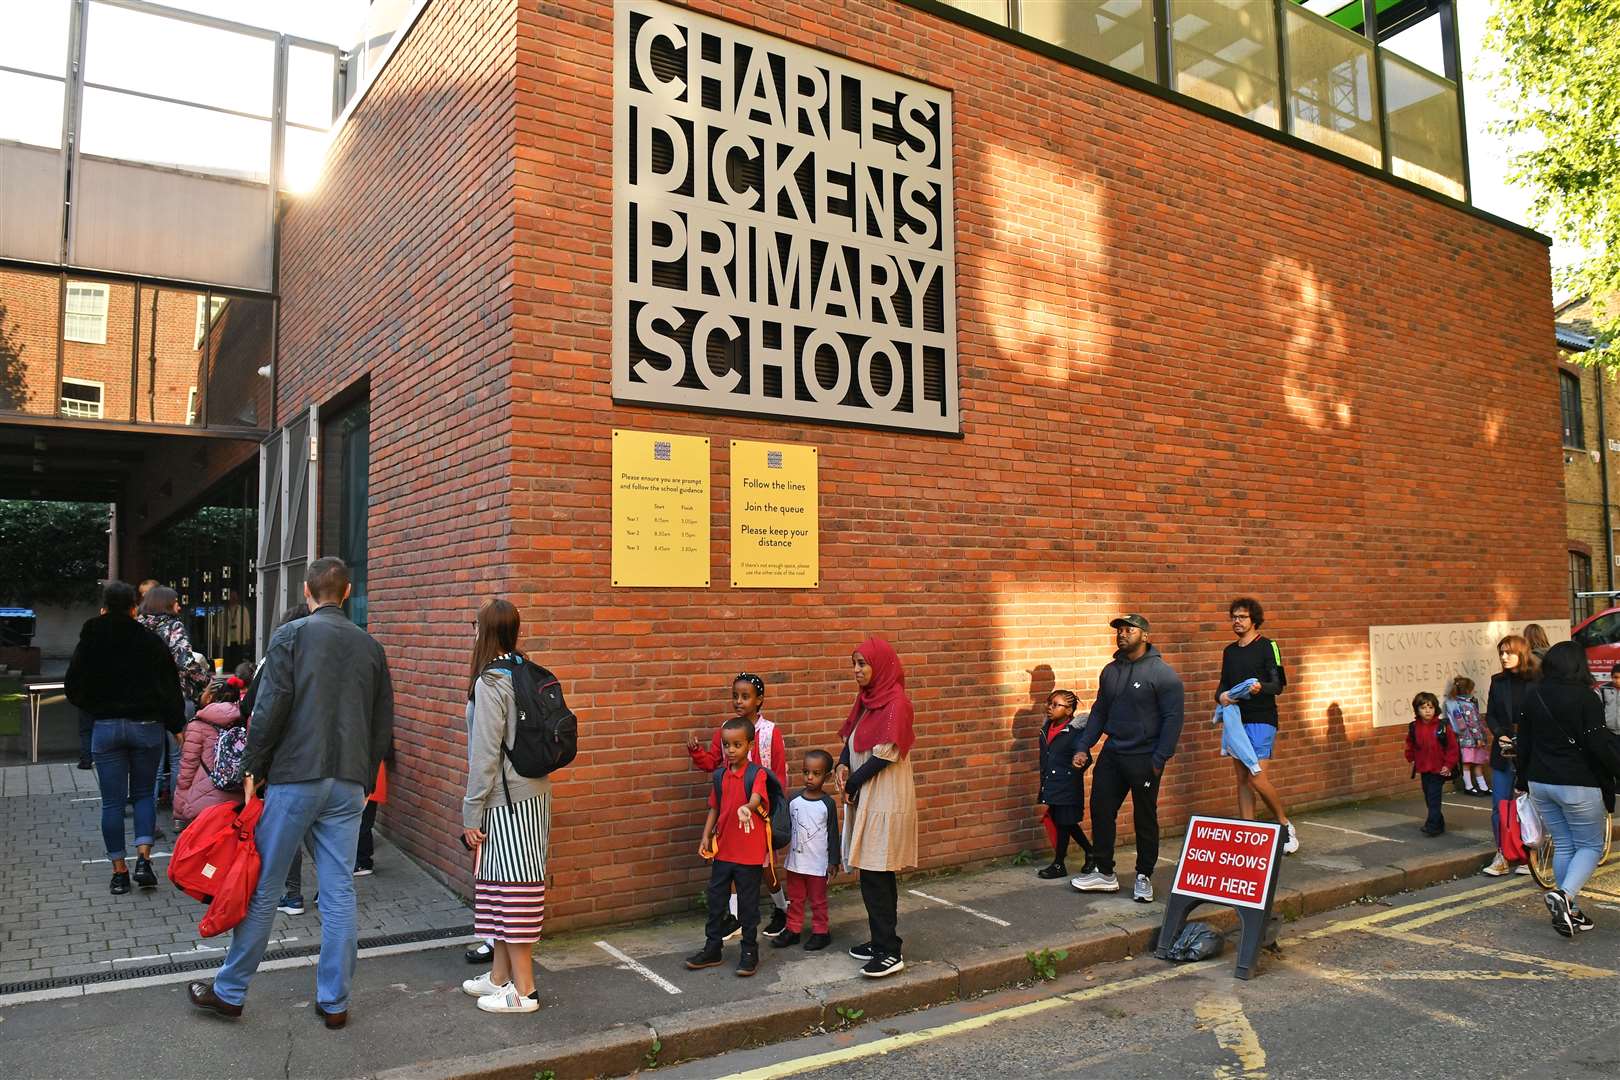 Pupils on the first day back to school at Charles Dickens Primary School in London (Dominic Lipinski/PA)